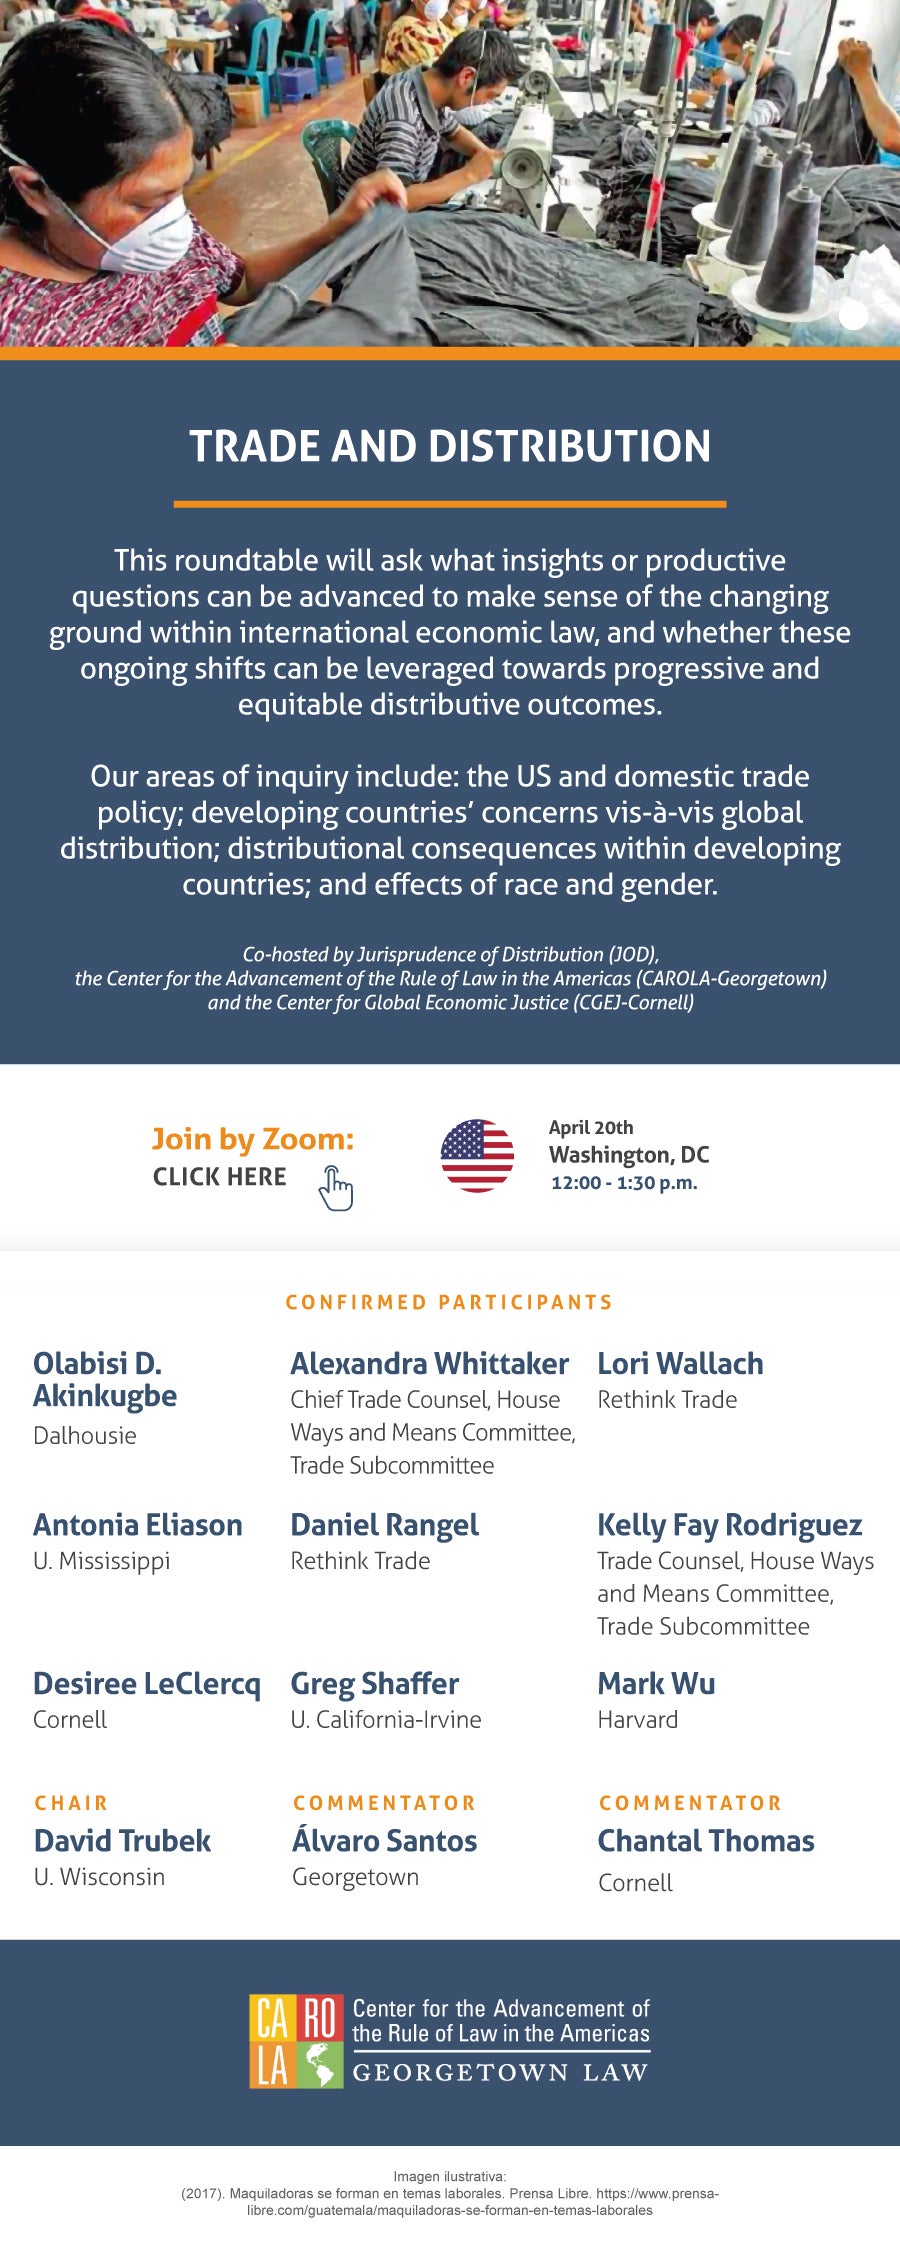 Trade and Distribution roundtable flyer.